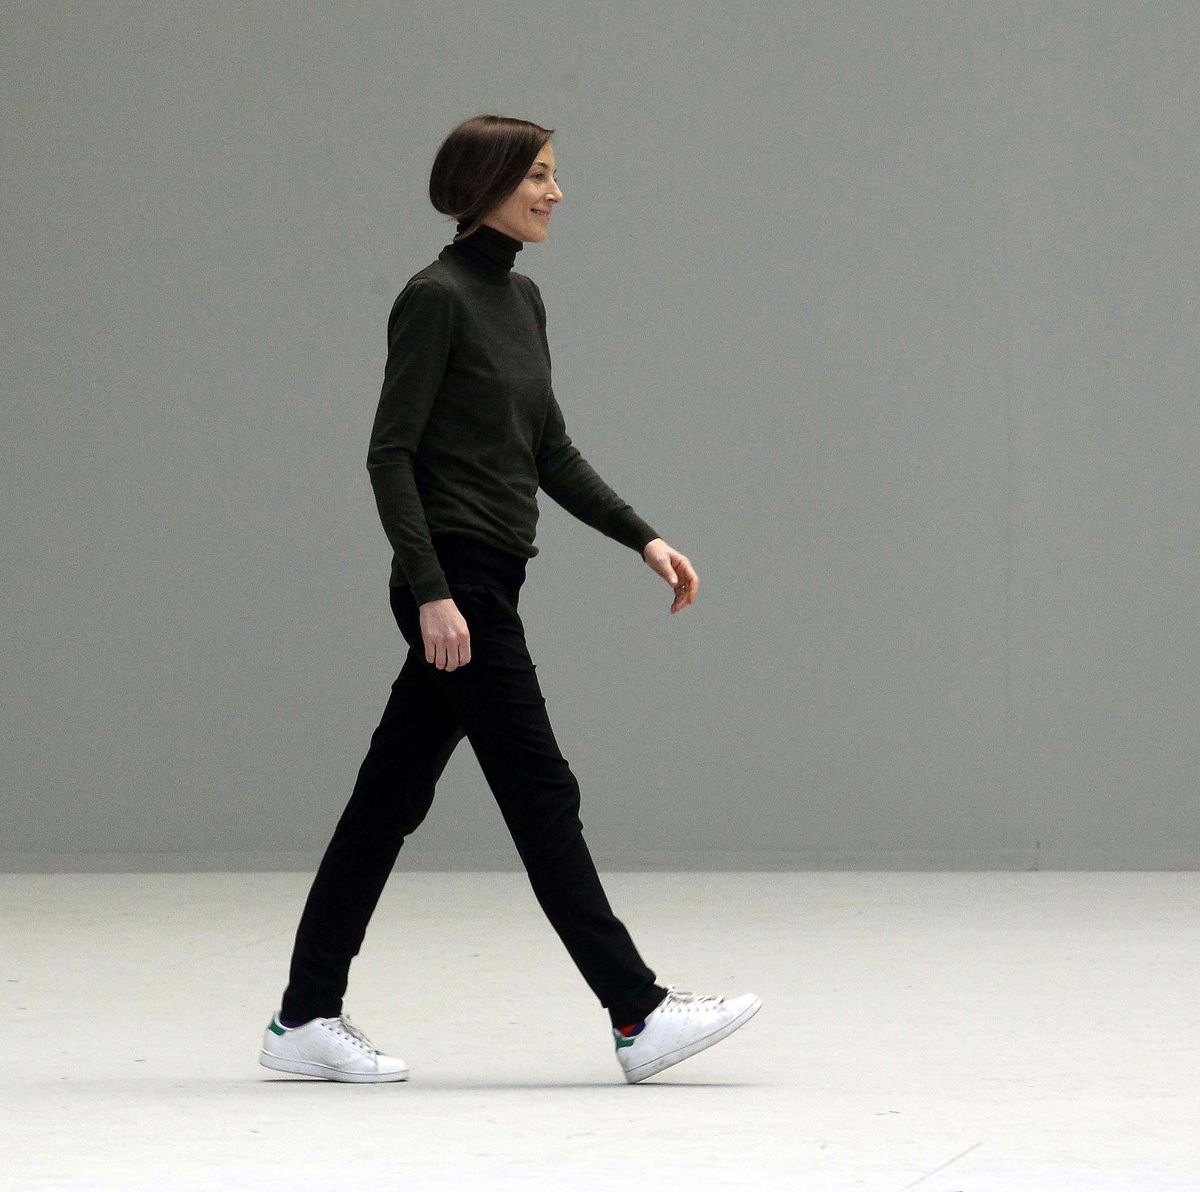 Phoebe Philo Designed 17 Runway Collections at Céline, Here Are All of Them  in Order of Greatness